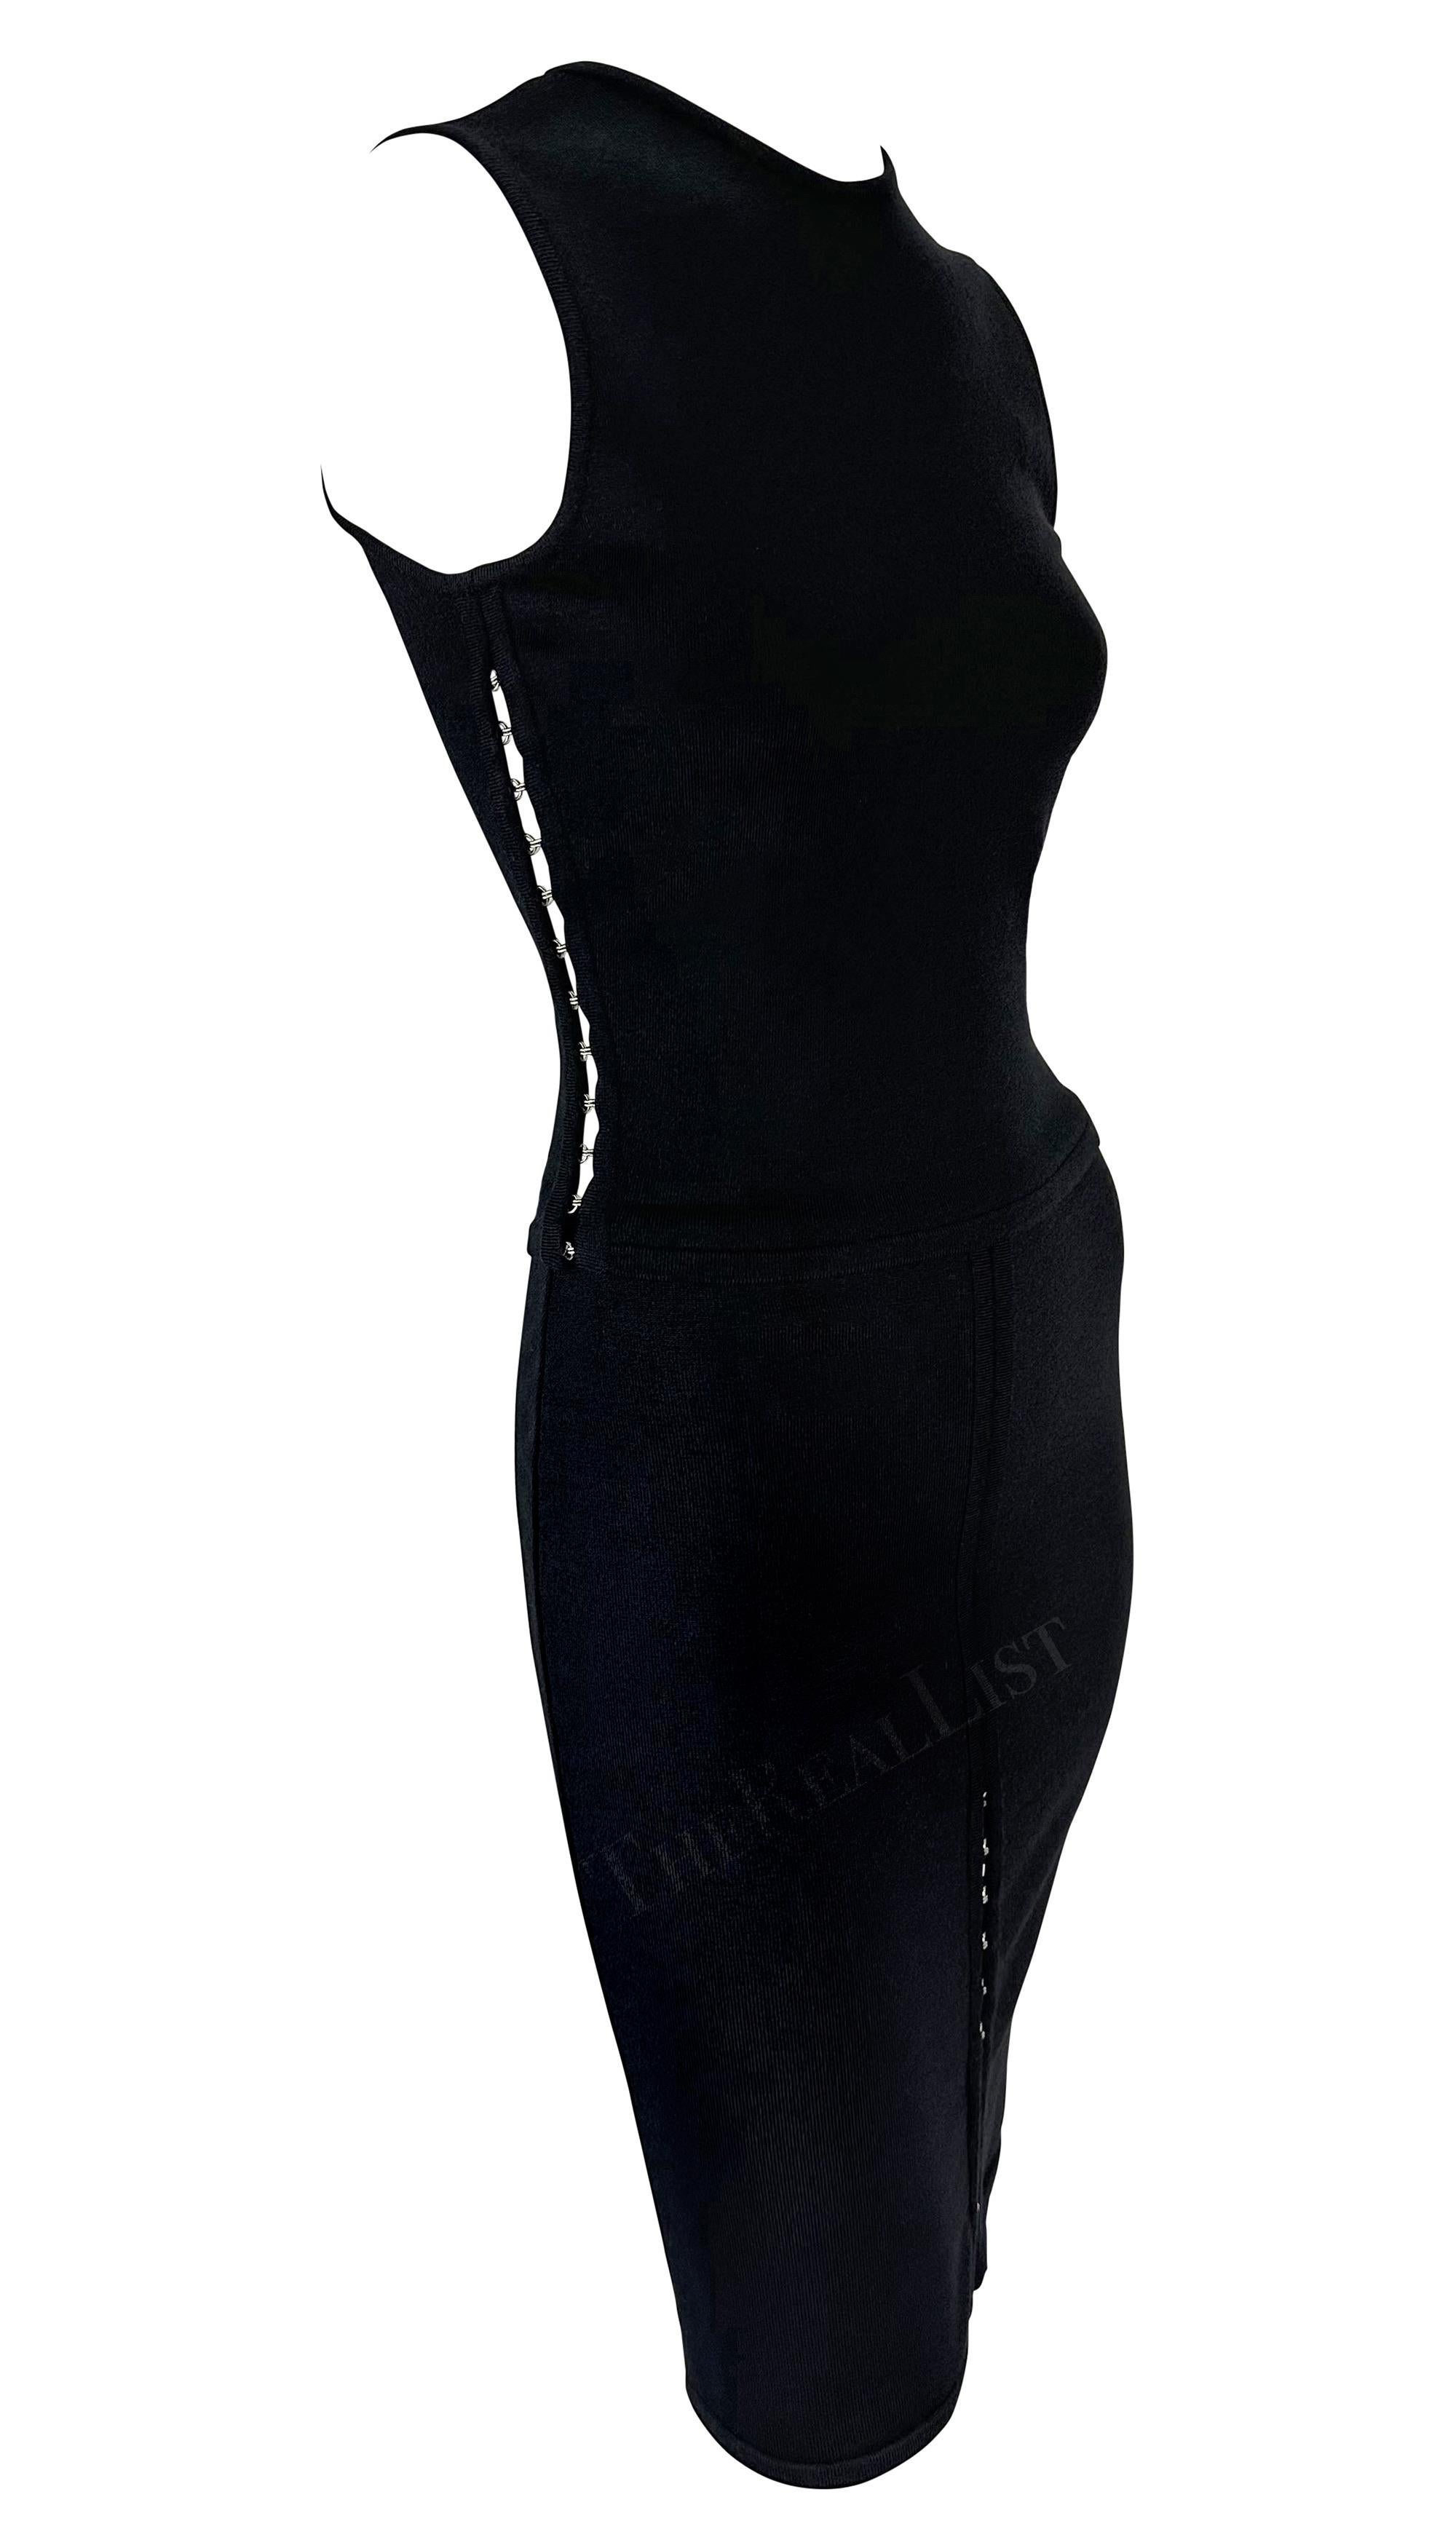 S/S 2002 Gianni Versace by Donatella Black Knit Tank Top Skirt Set  For Sale 1